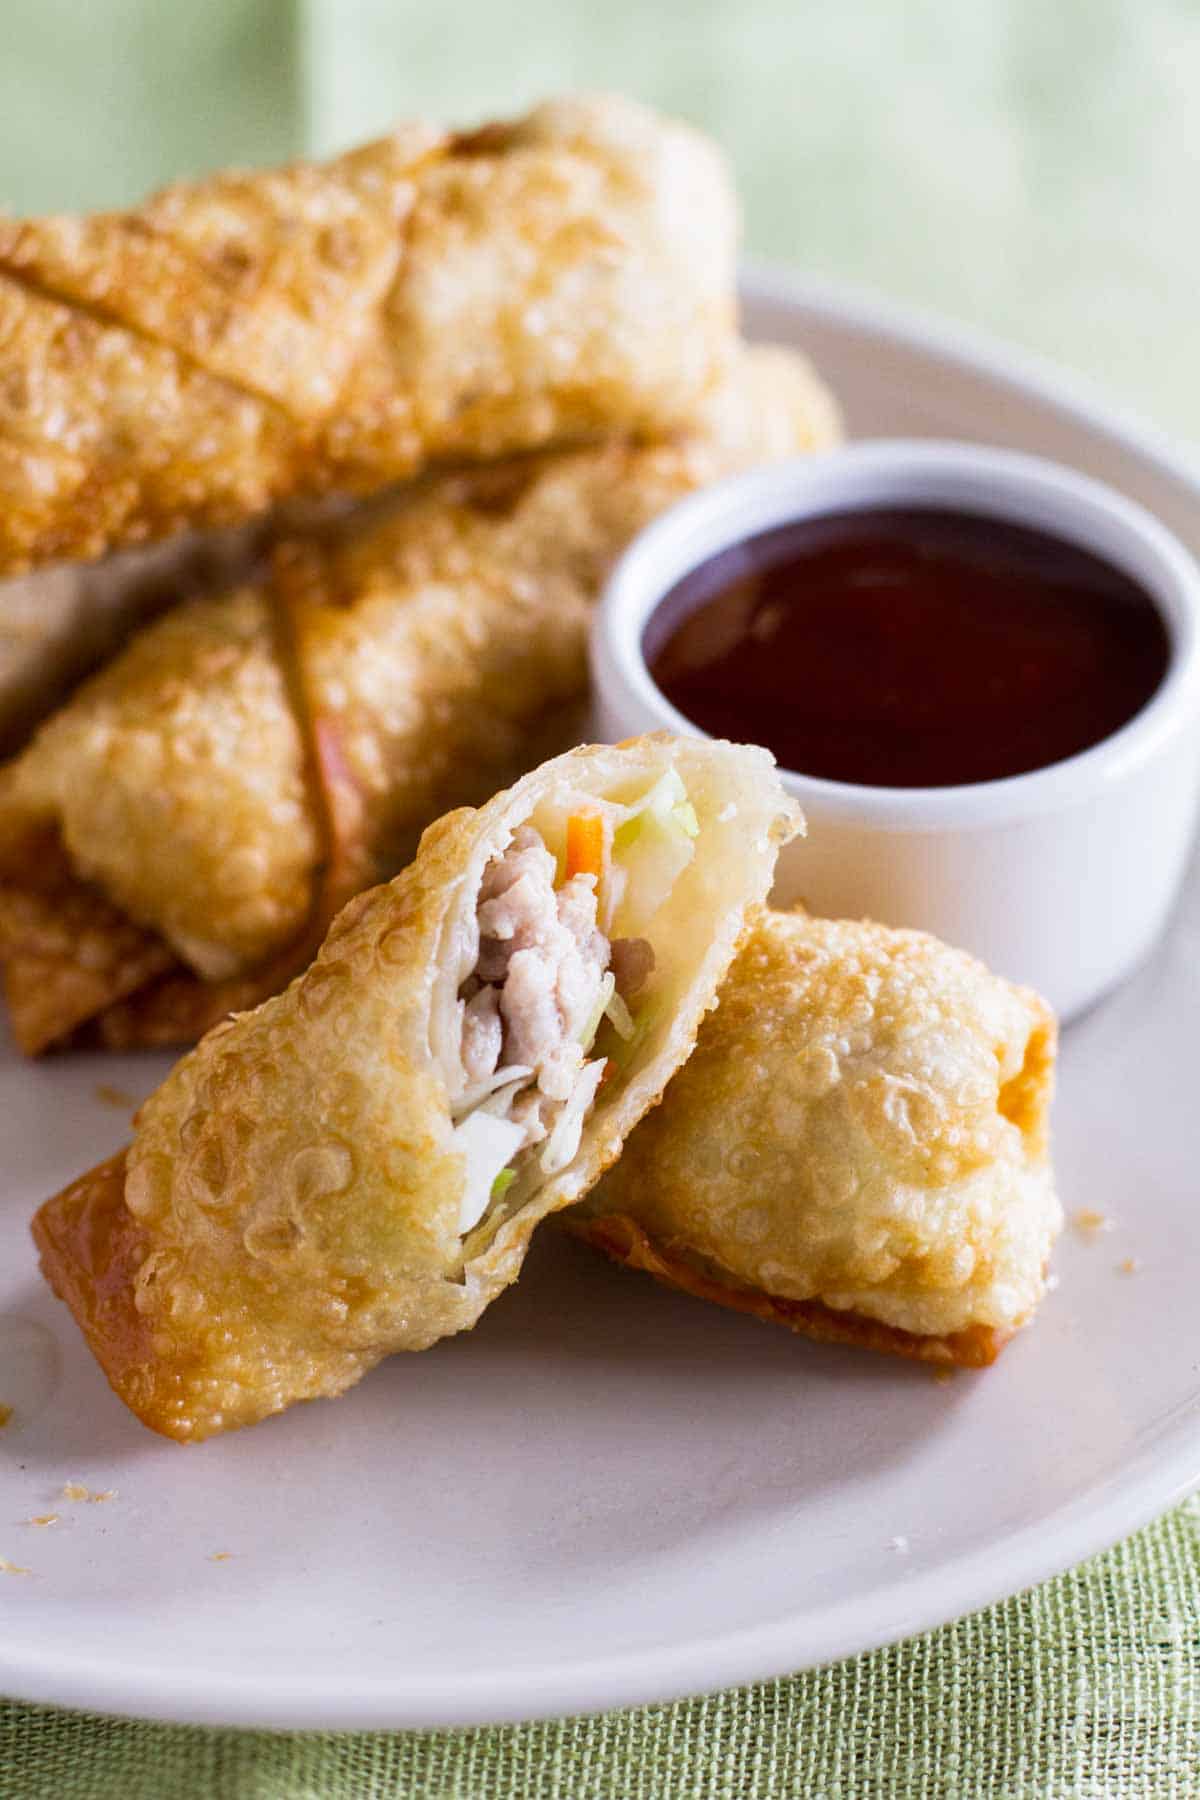 egg roll cut to show interior